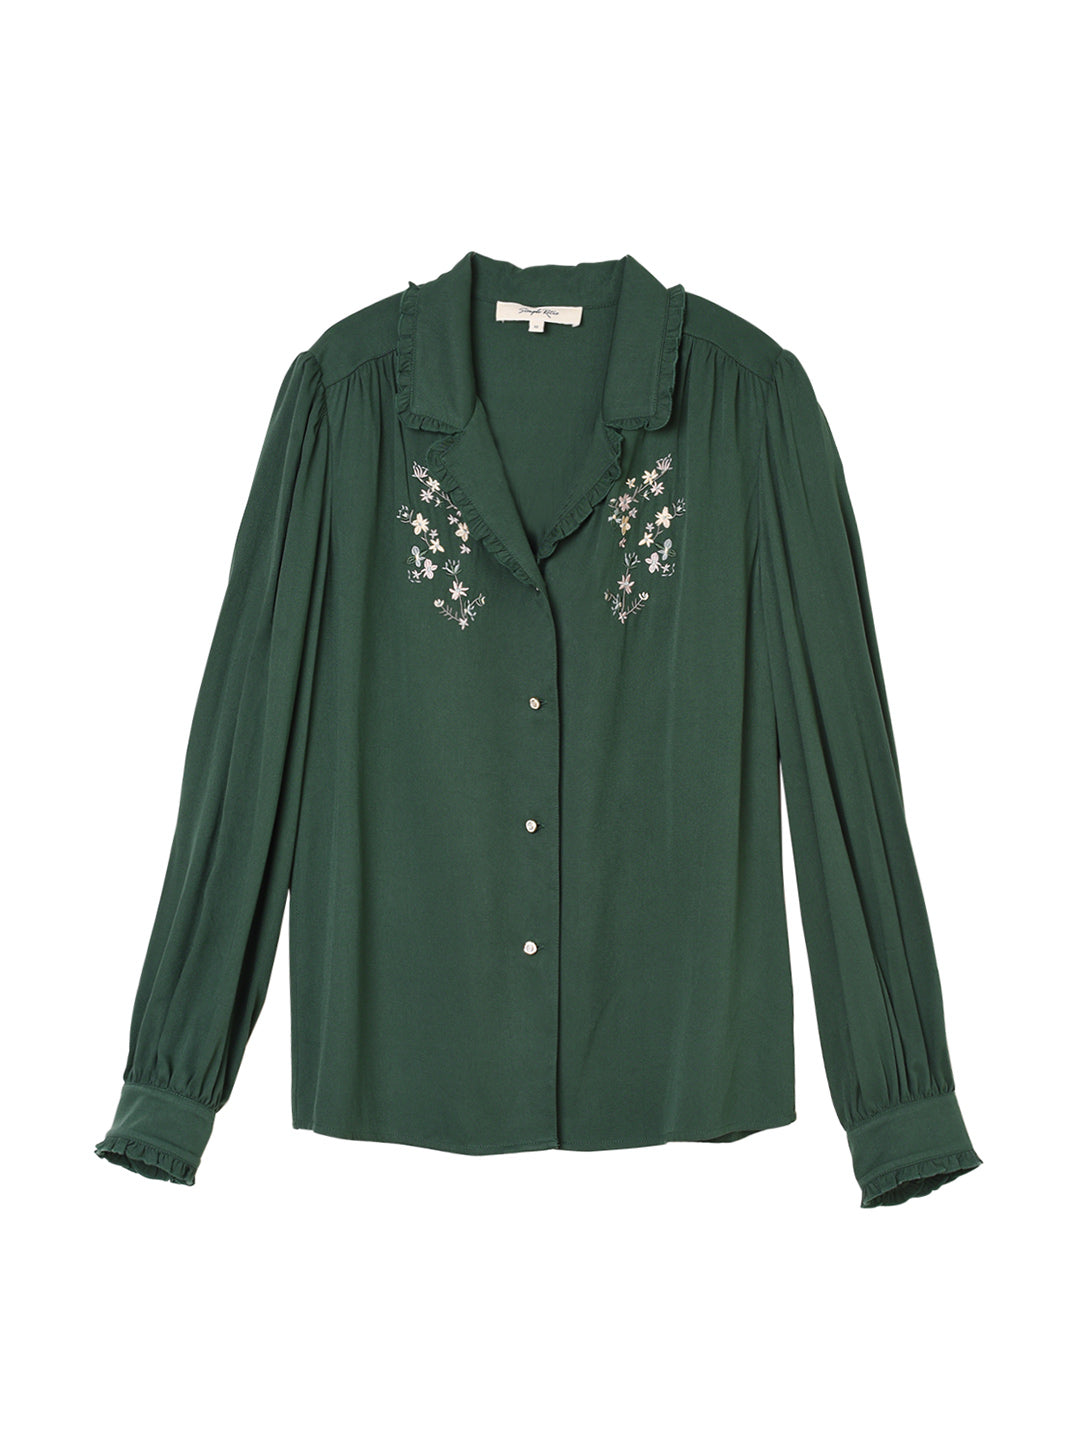 【Final Sale】Convallaria Floral Embroidered Green Puff Top